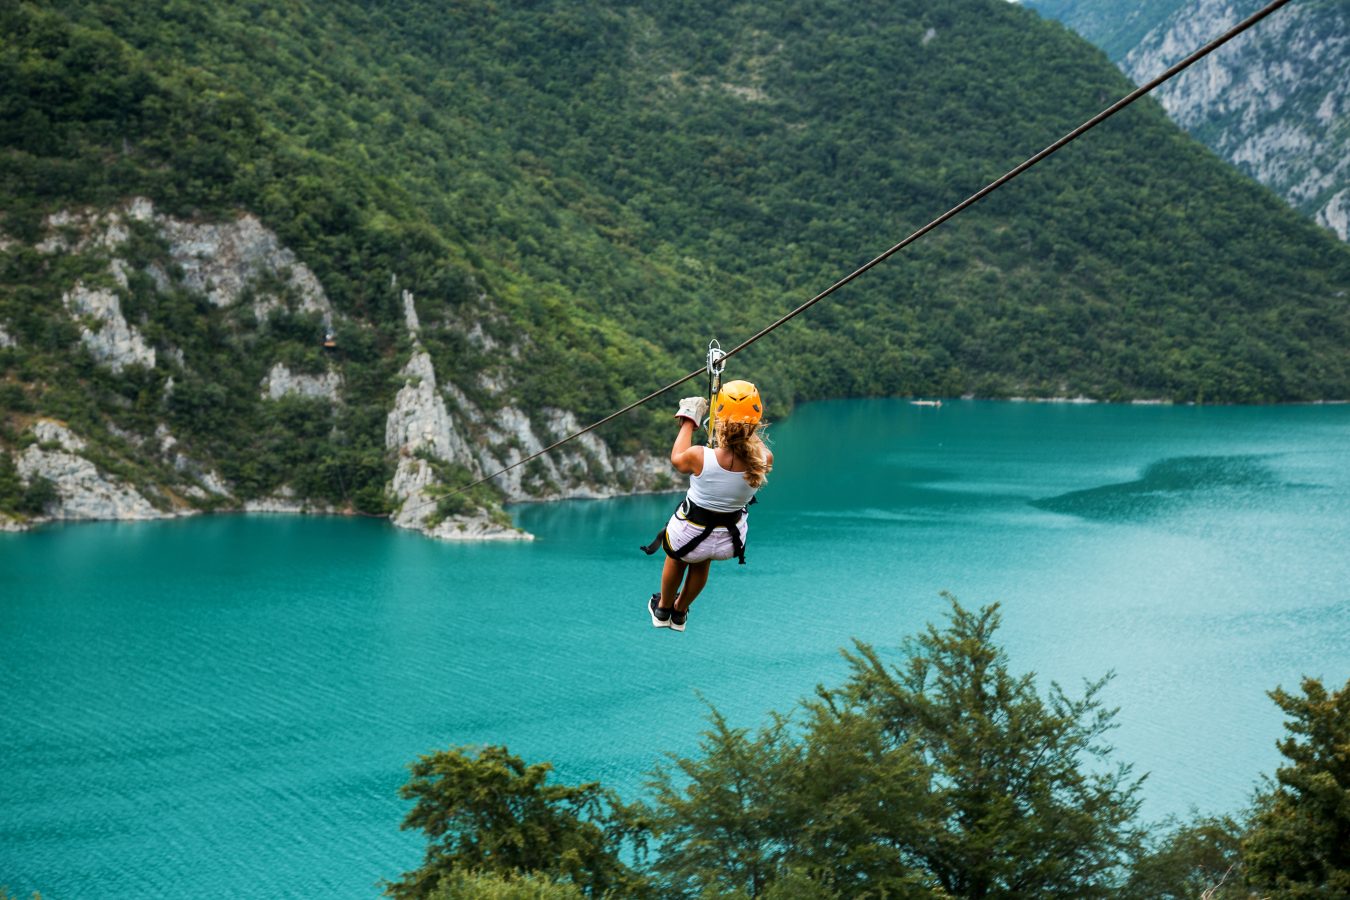 A traveler sliding on a zip line over a bright blue lake - taking on the fun and adventure of gap year travel.